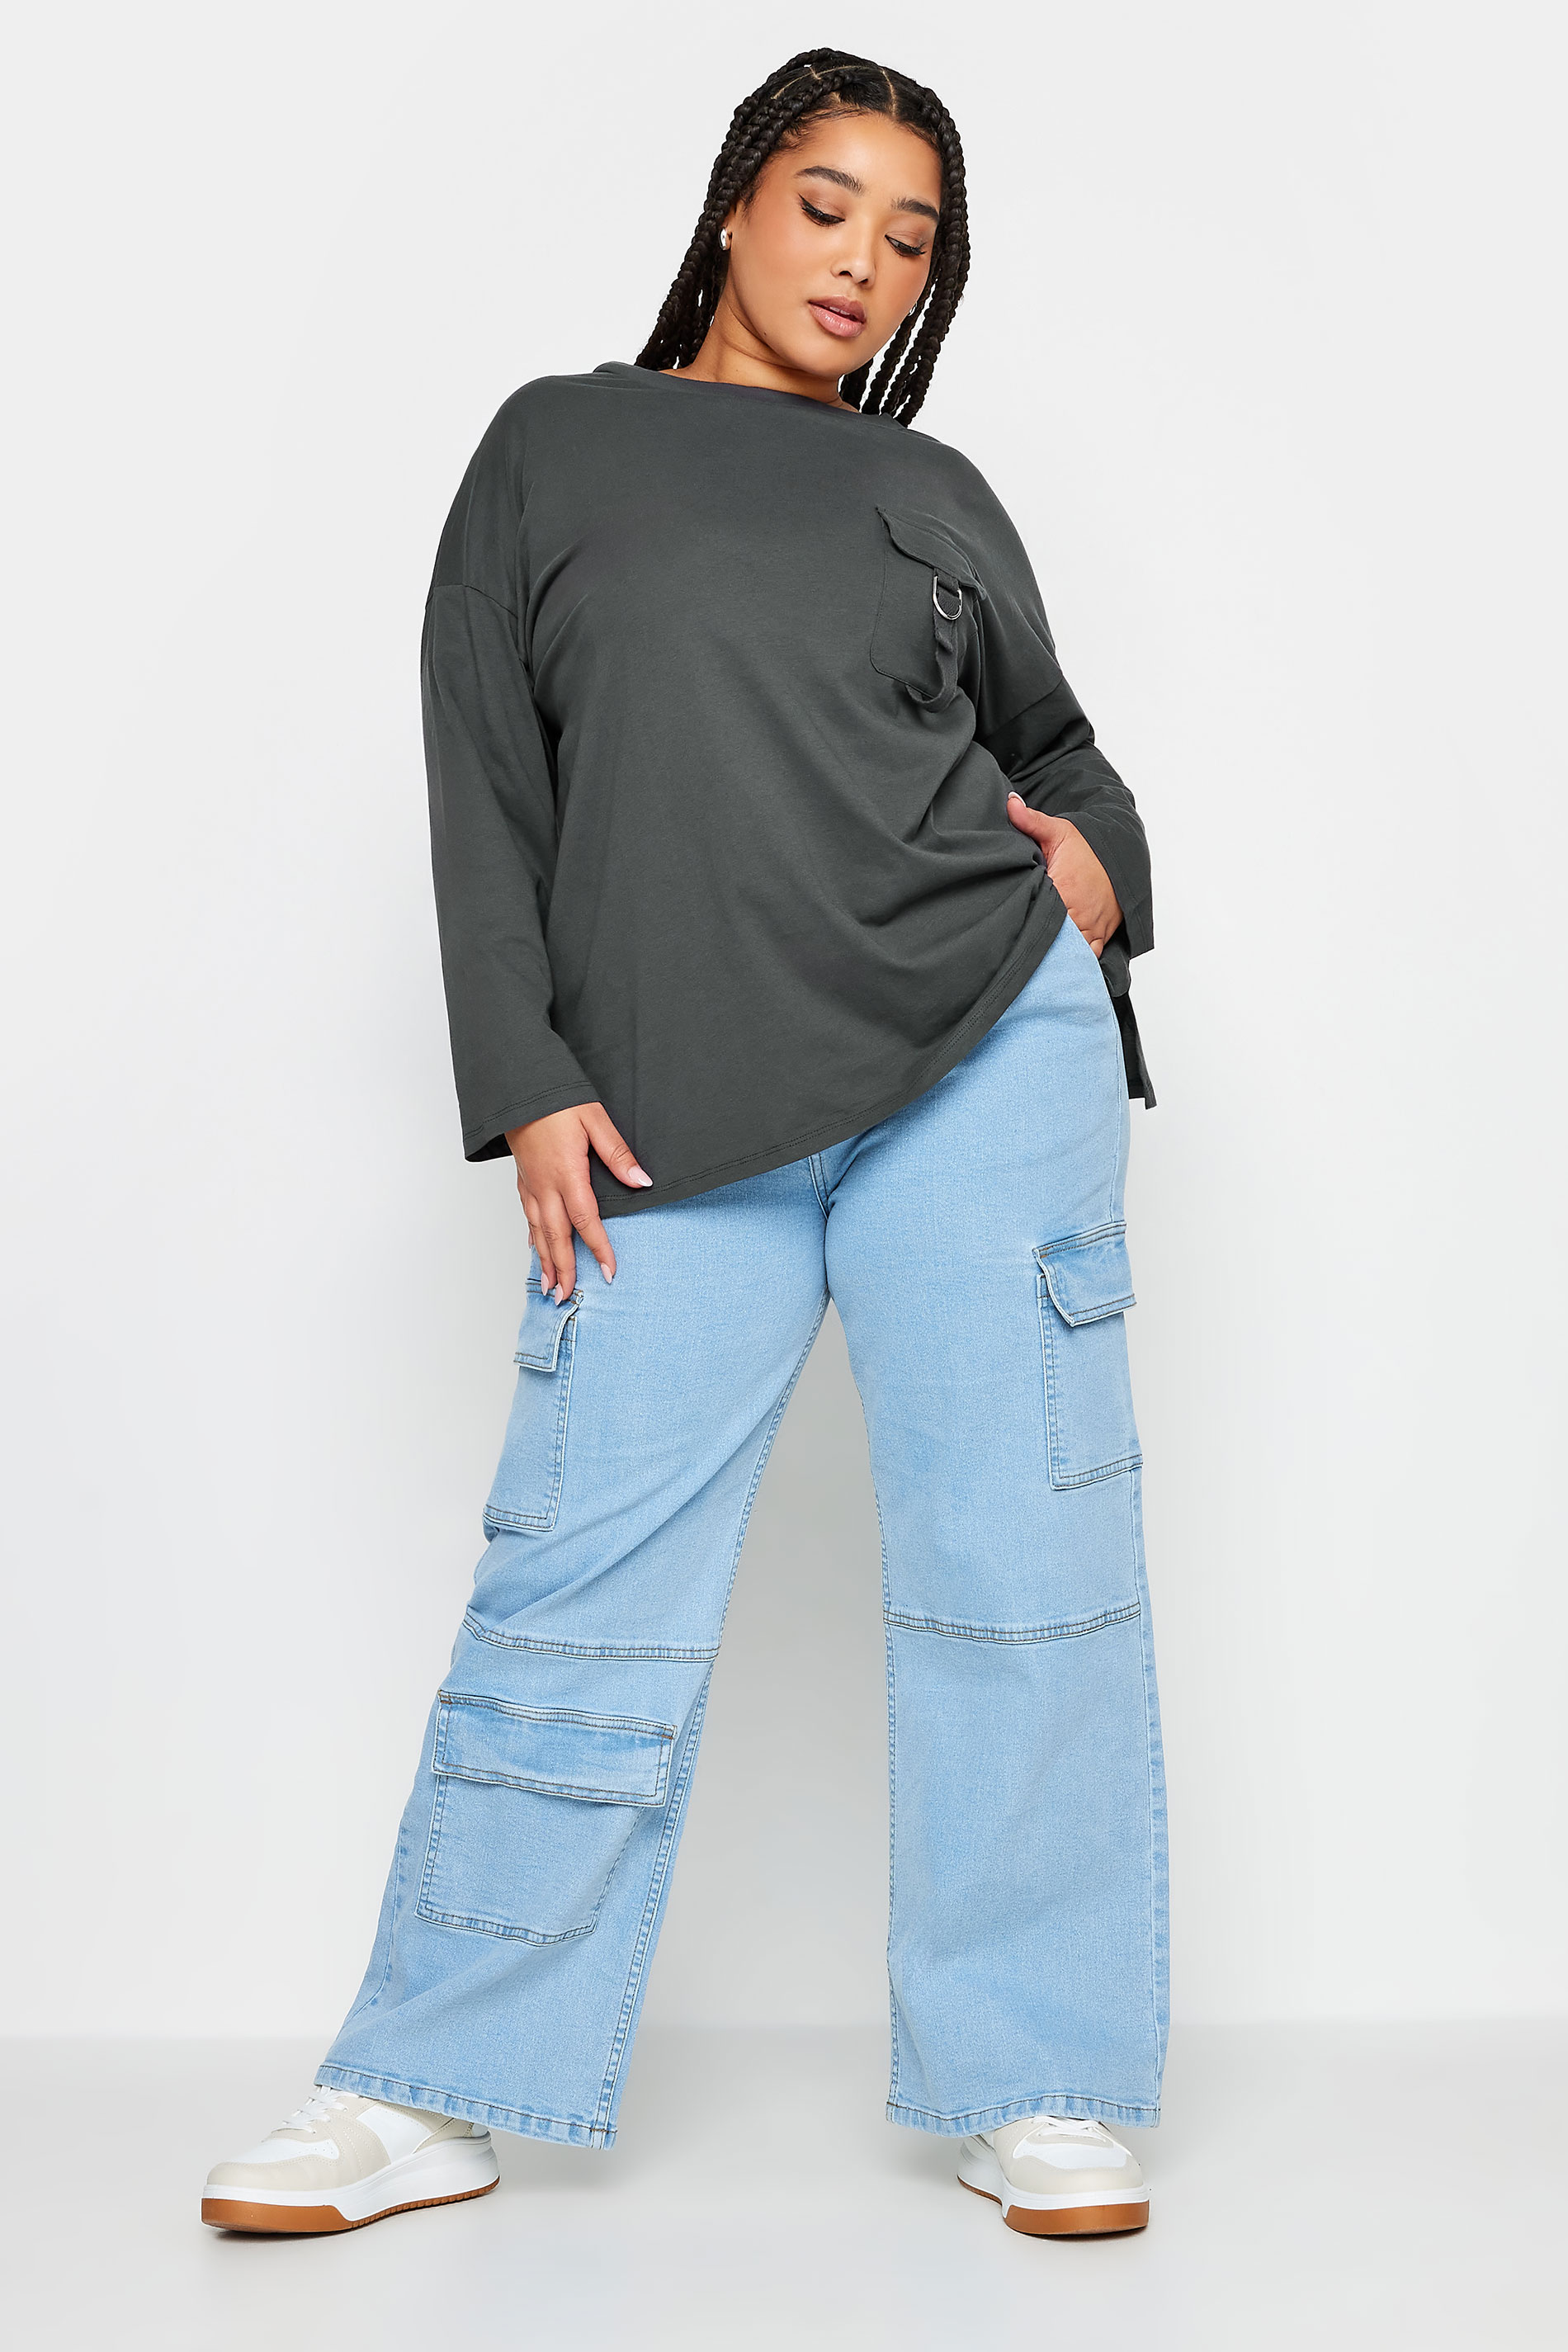 LIMITED COLLECTION Plus Size Charcoal Grey Utility Pocket Long Sleeve T-Shirt | Yours Clothing 2